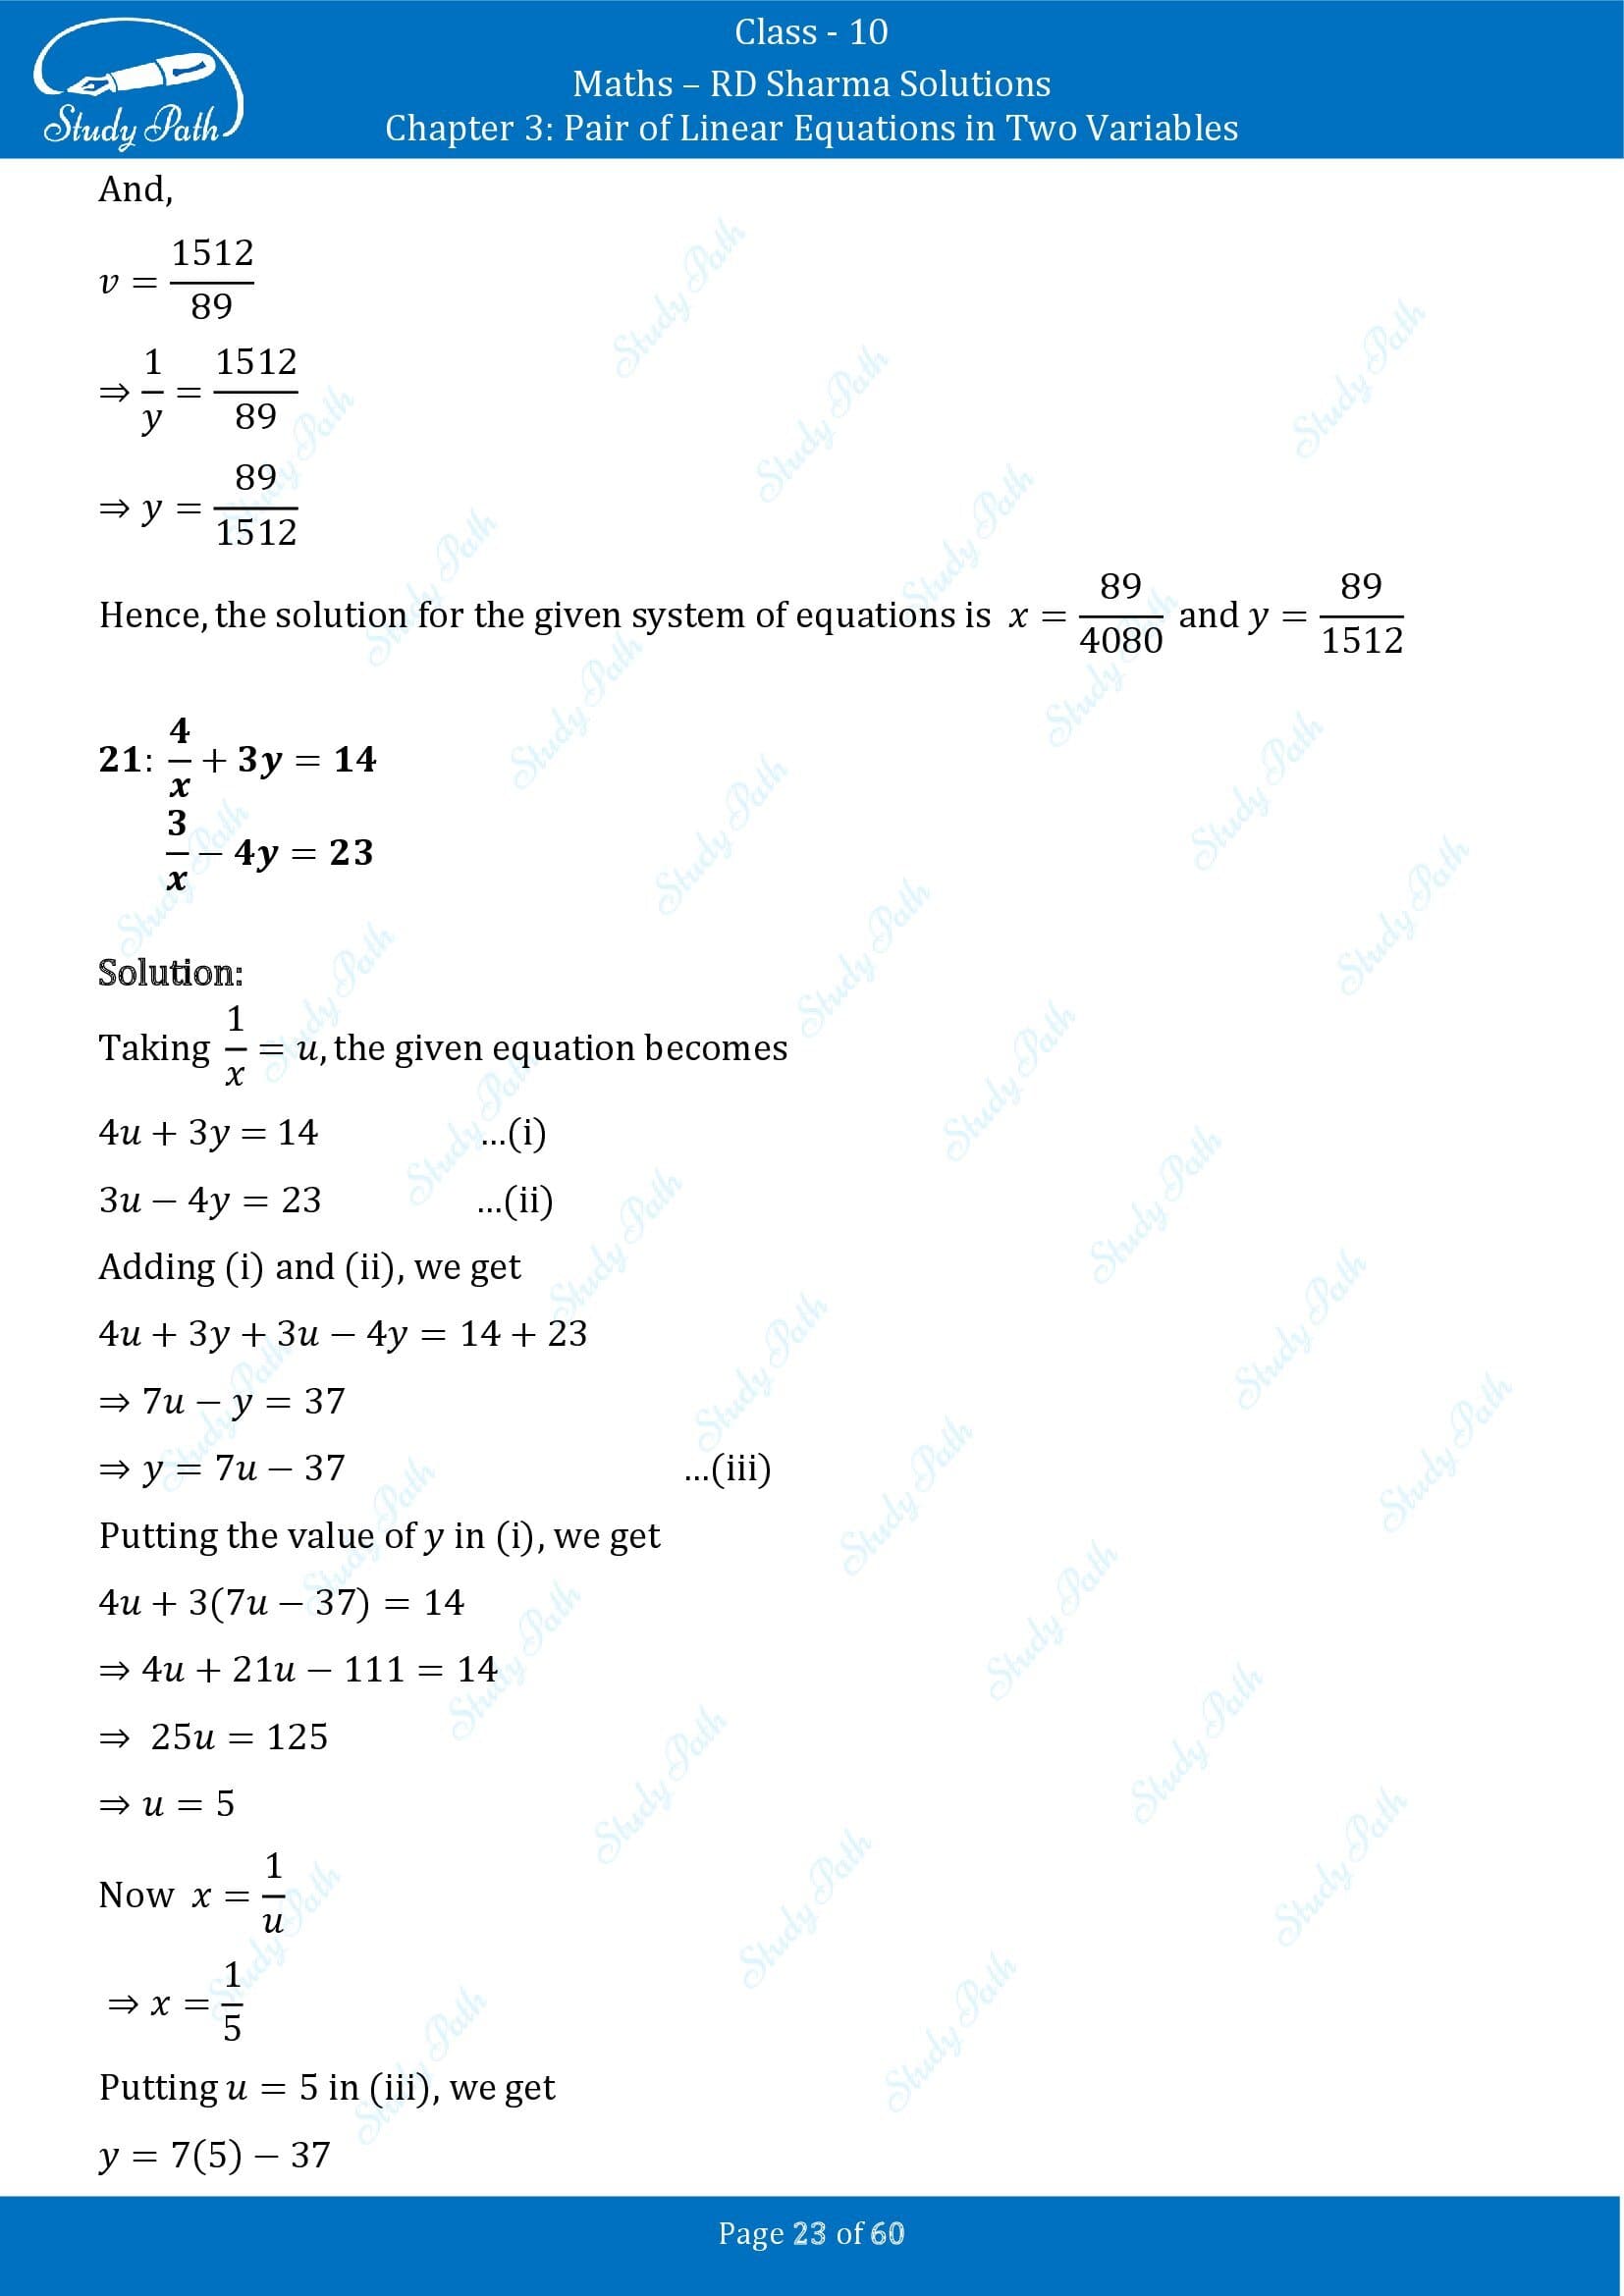 RD Sharma Solutions Class 10 Chapter 3 Pair of Linear Equations in Two Variables Exercise 3.3 00023